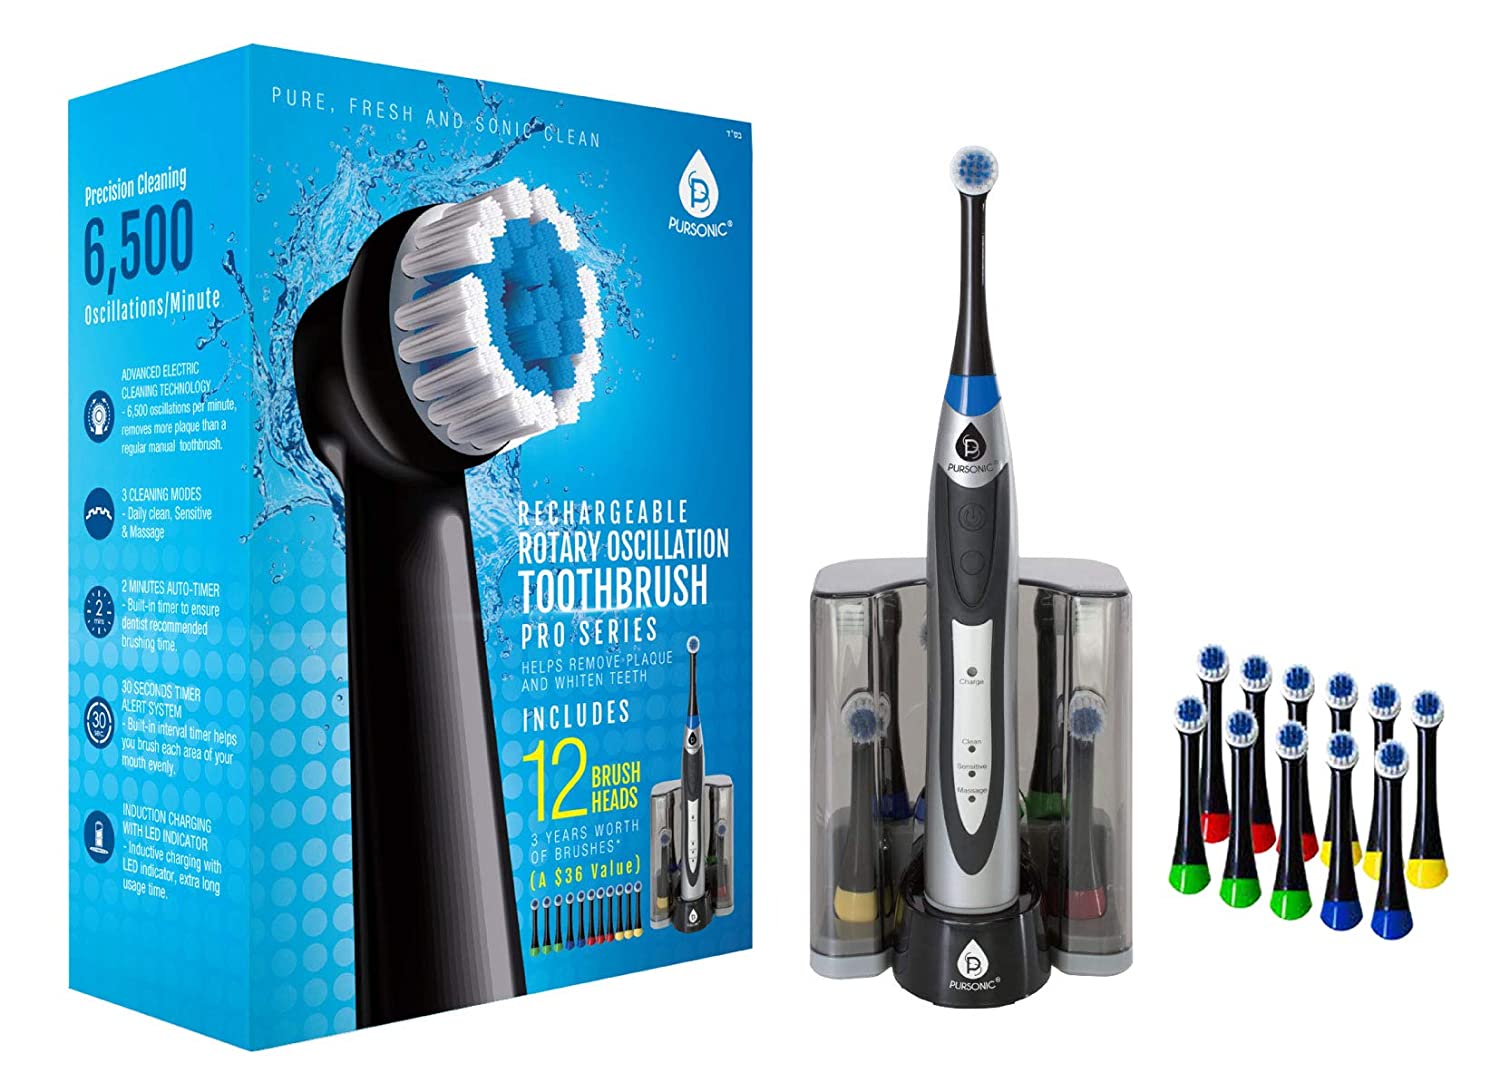 PURSONIC S330 Auto-Off Electric Toothbrush